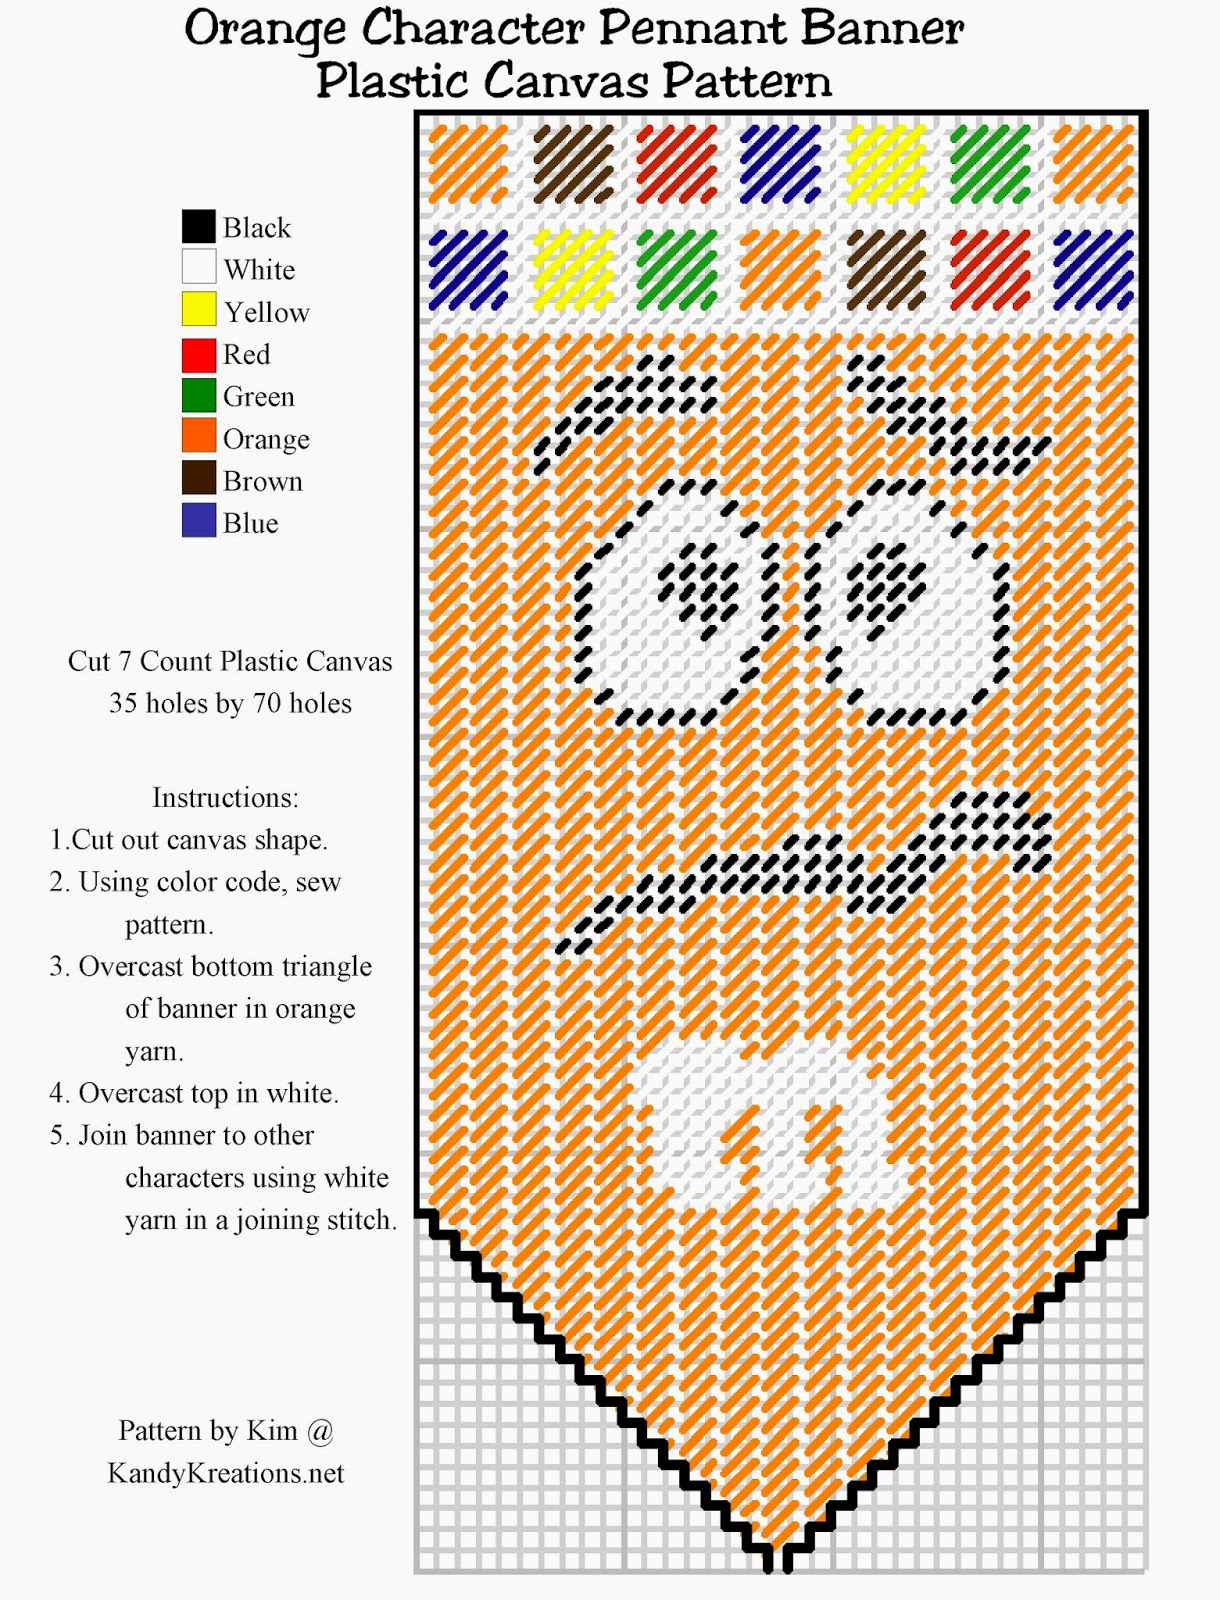 Make your own pennant banner with the orange M&M character using this Plastic canvas pattern freebie.  Simply right click and save this pattern to create your own party decoration or kitchen decor.